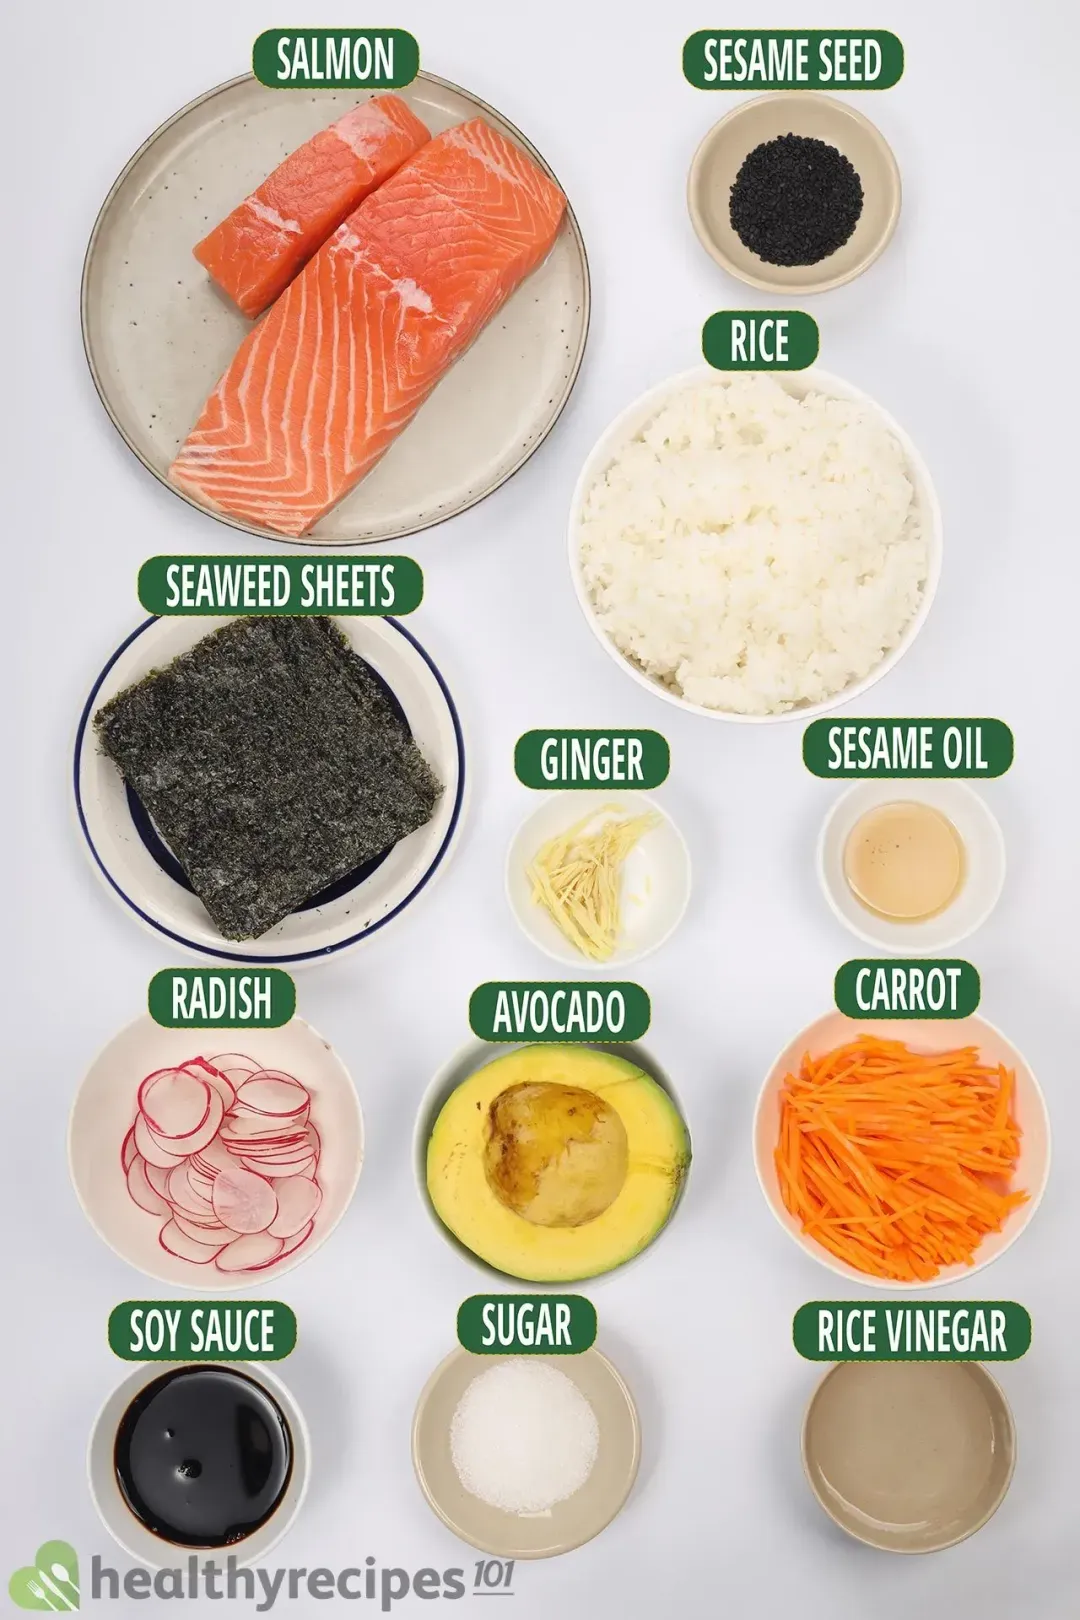 Ingredients in separate bowls: salmon filets, cooked rice, seaweed sheets, soy sauce, and other toppings